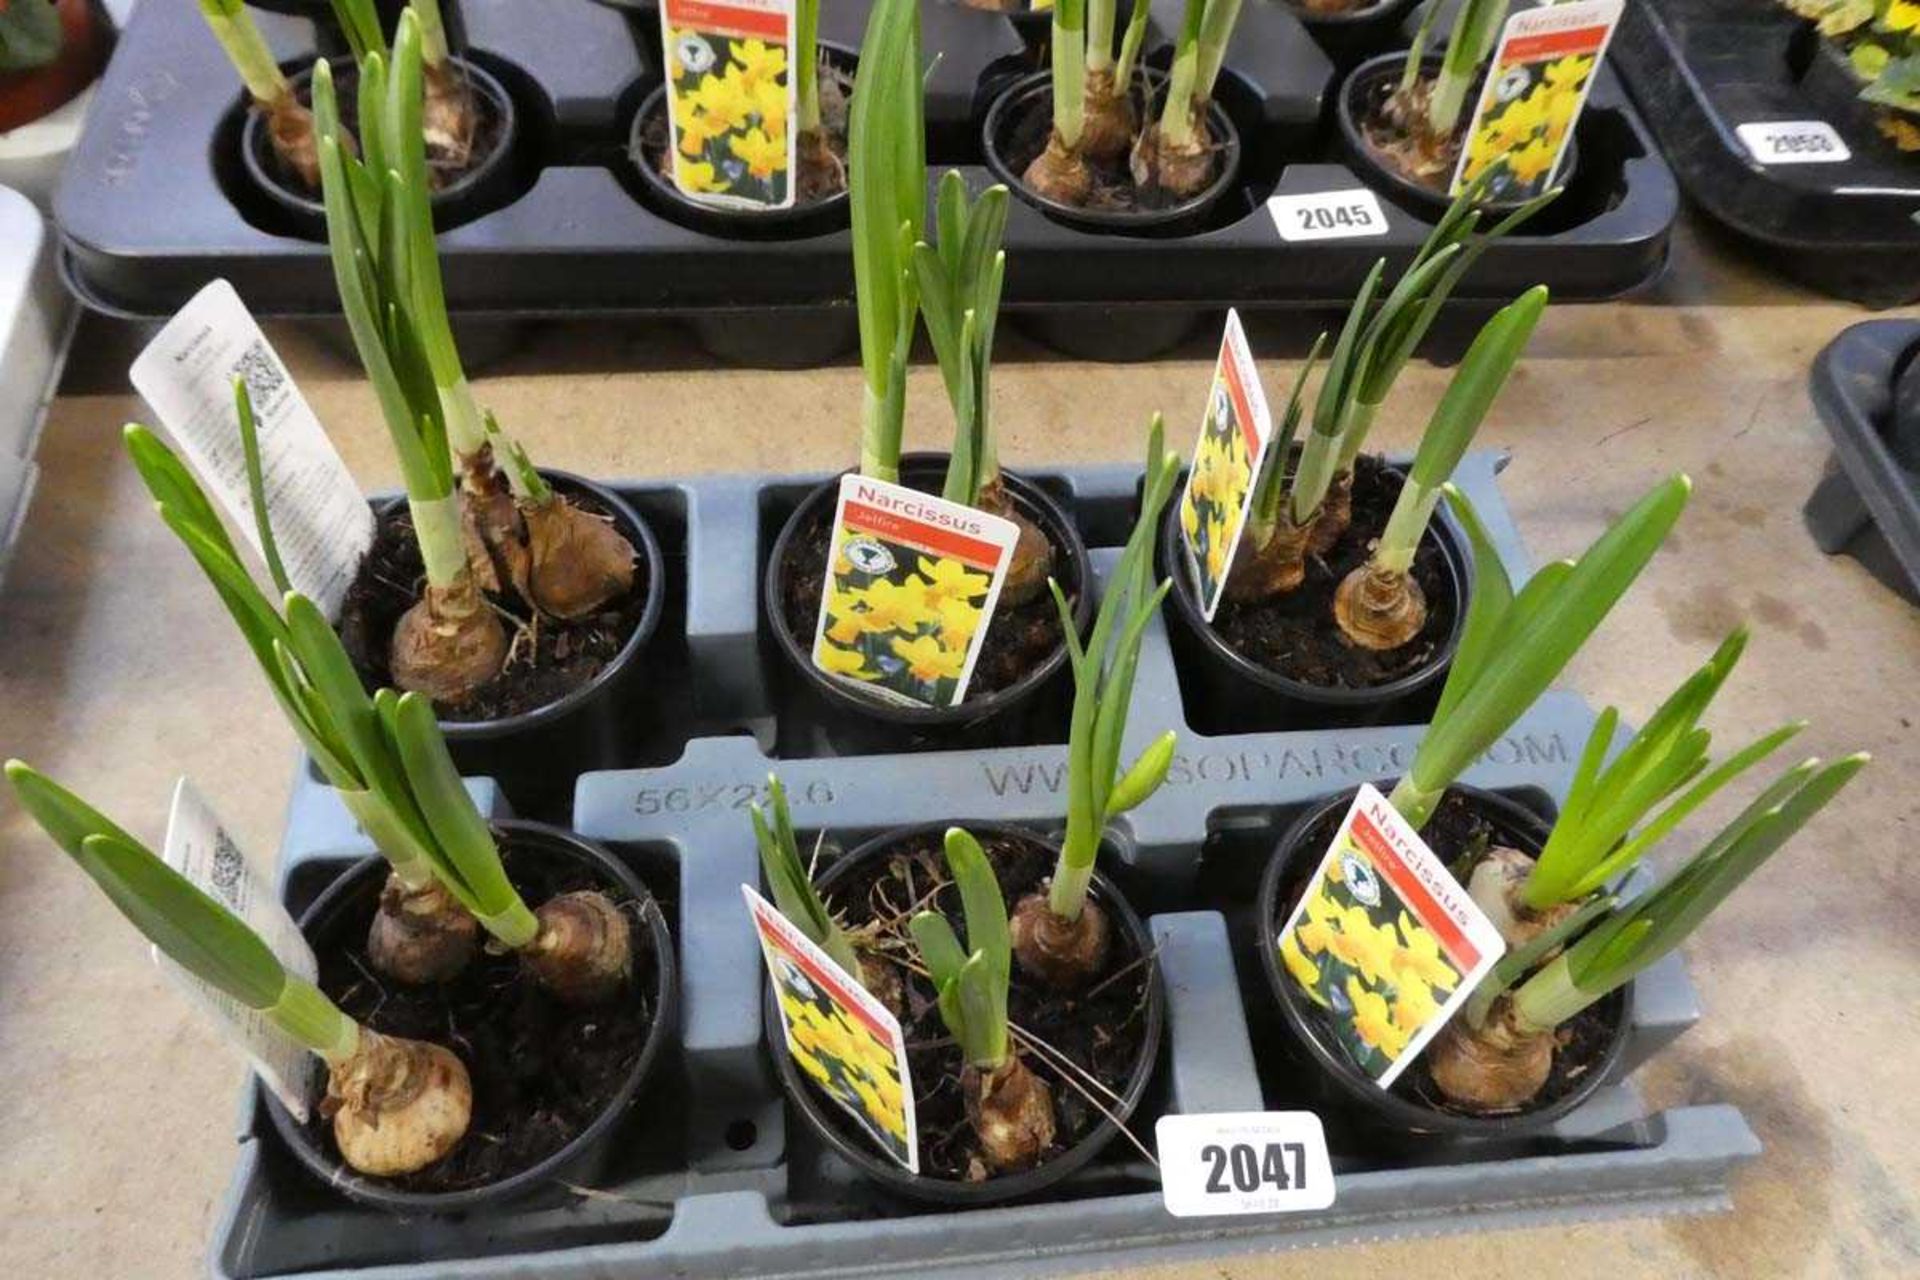 Tray containing 6 potted narcissus 'Jet Fire' bulbs